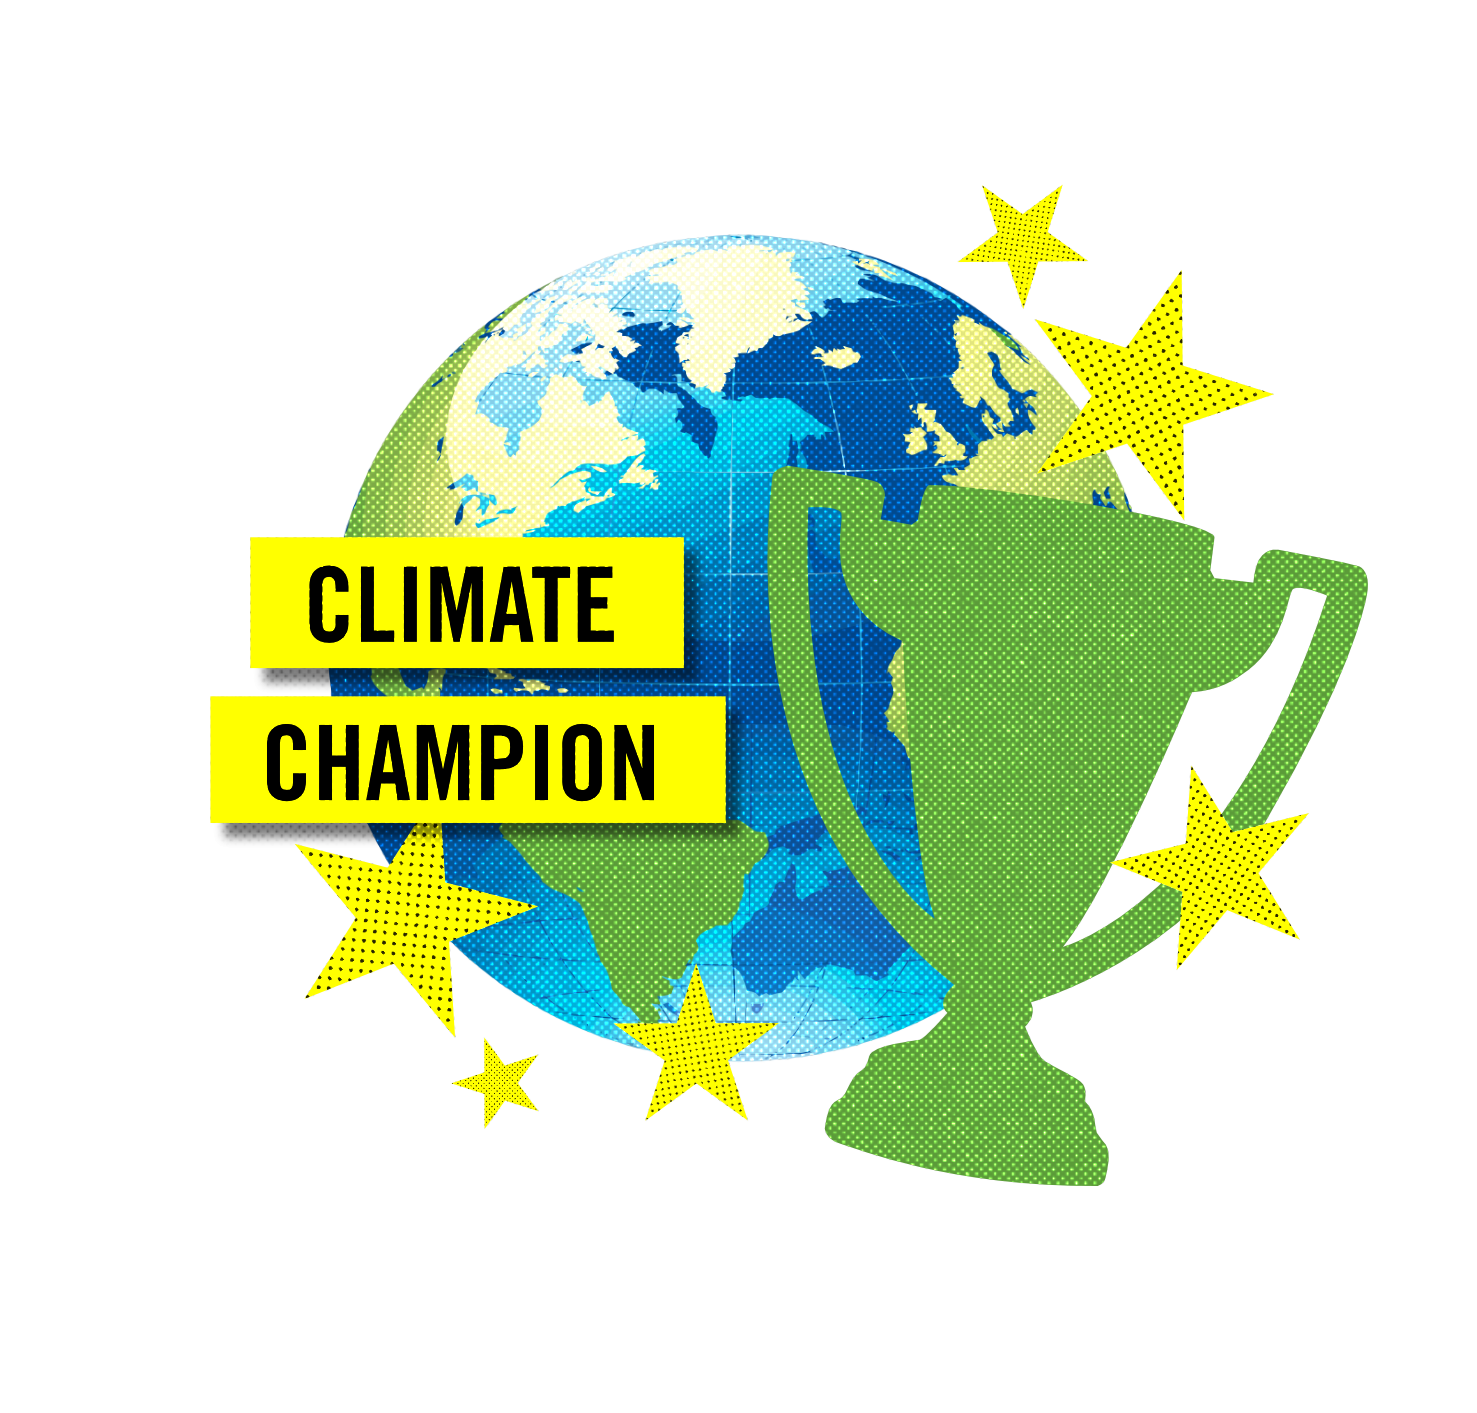 Maybe you’re a Climate Champion, feeling the heat of global warming and rising to the challenge of uniting countries around the future of the planet. It’s time to fight for the right to a liveable climate.